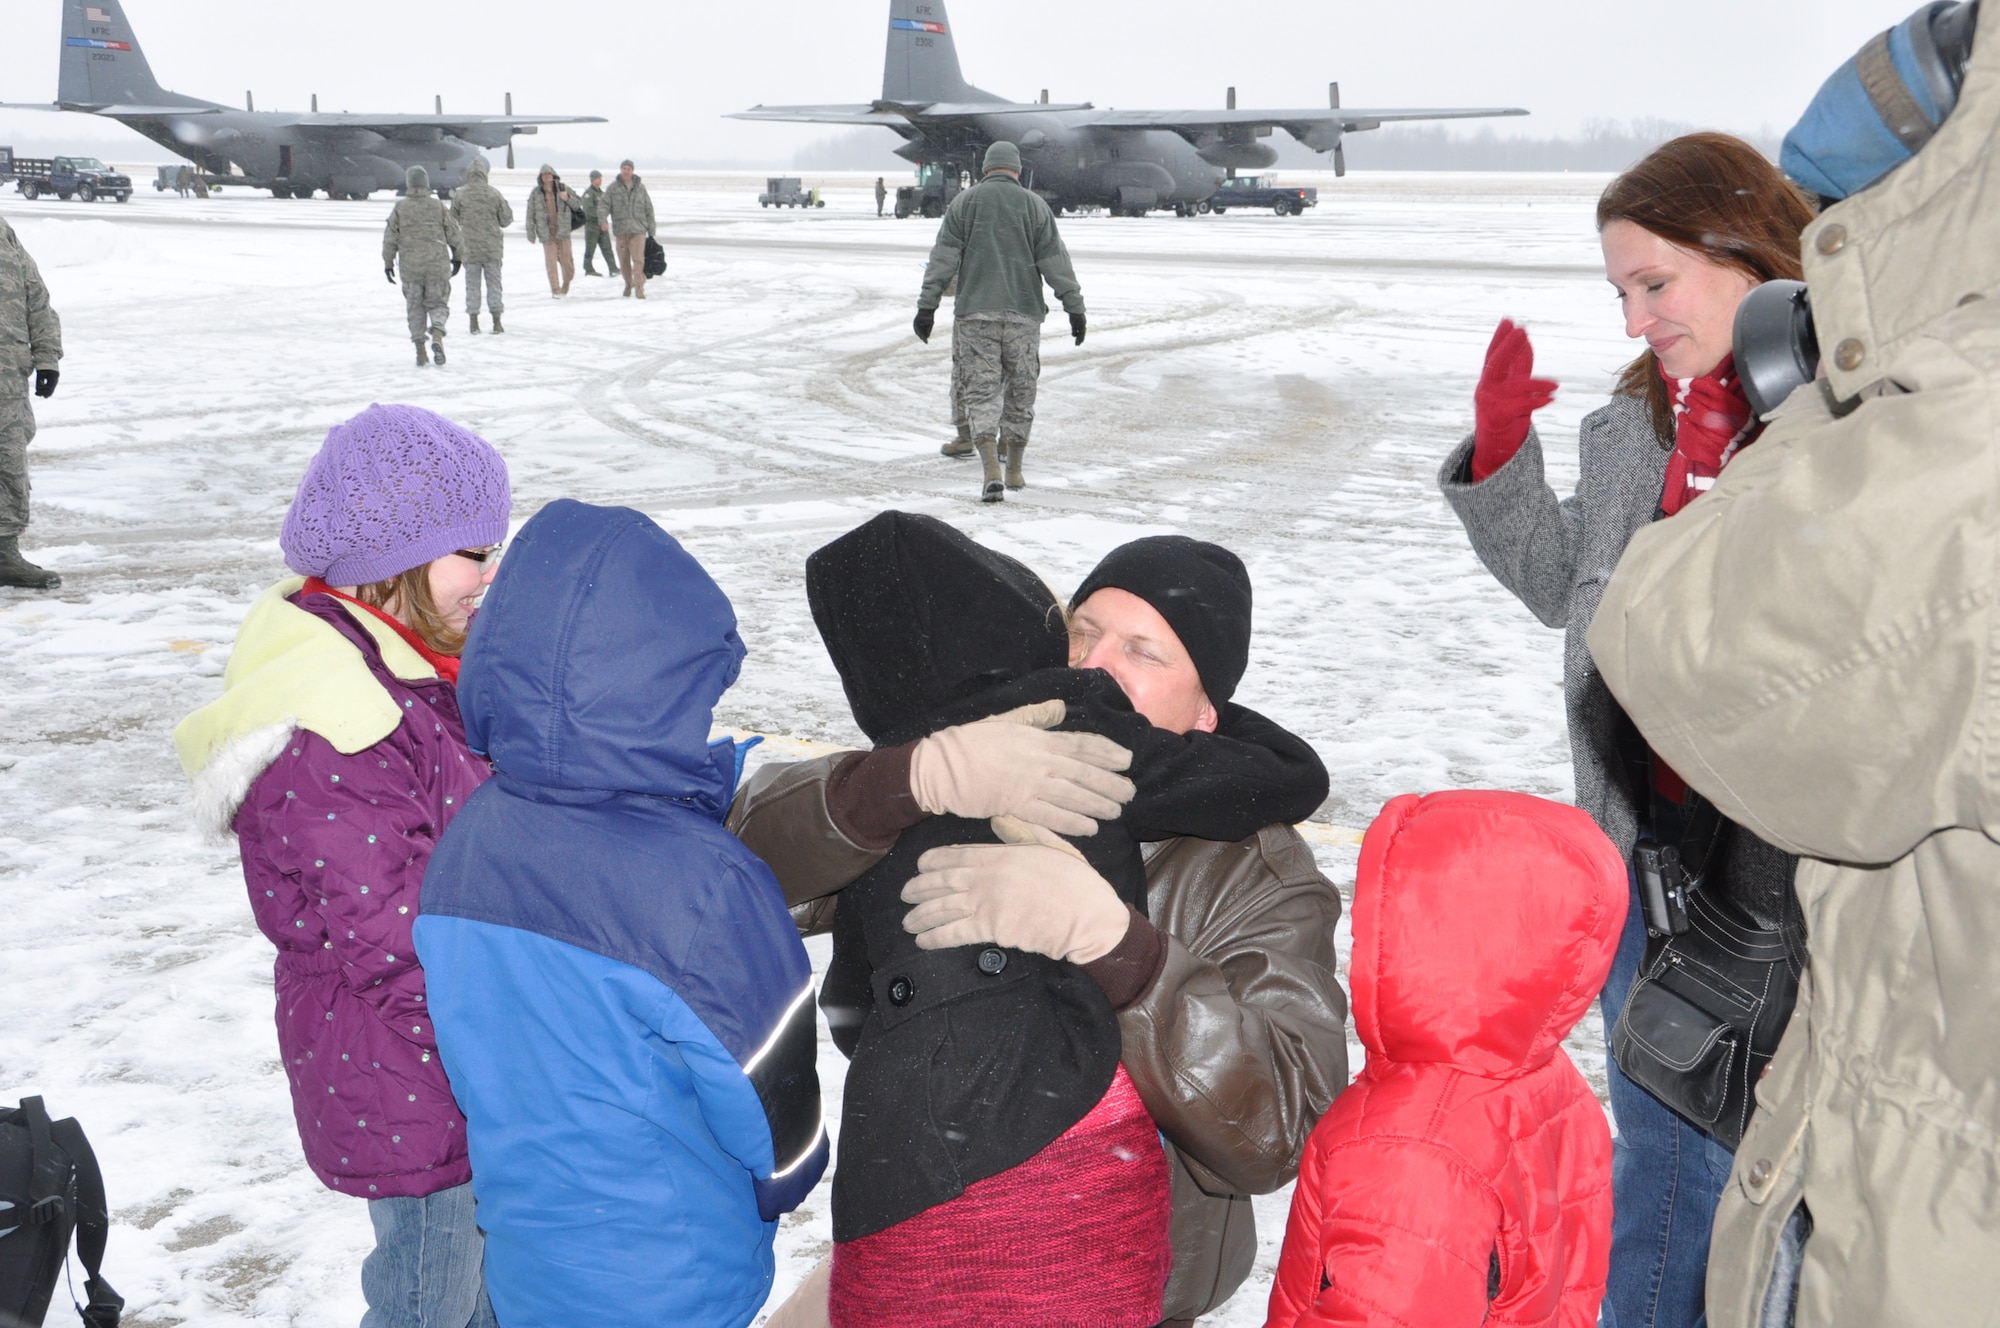 YOUNGSTOWN AIR RESERVE STATION, Ohio – Air Force Reserve Staff Sgt. Christopher O’Neill, a loadmaster assigned to the 773rd Airlift Squadron, is greeted by his children and his wife, Amy as he arrives on the flightline here, Jan. 19, 2012. O’Neill is one of approximately 40 Citizen Airmen that are the last of more than 140 Air Force Reservists, assigned to the 910th Airlift Wing’s flying and maintenance squadrons based at YARS, returning to Northeast Ohio after a 120-day deployment to Southwest Asia that supported to airlift operations to various military installations throughout the U.S. Central Command (USCENTCOM) Area of Operations (AOR). U.S. Air Force photo by Master Sgt. Bob Barko Jr.